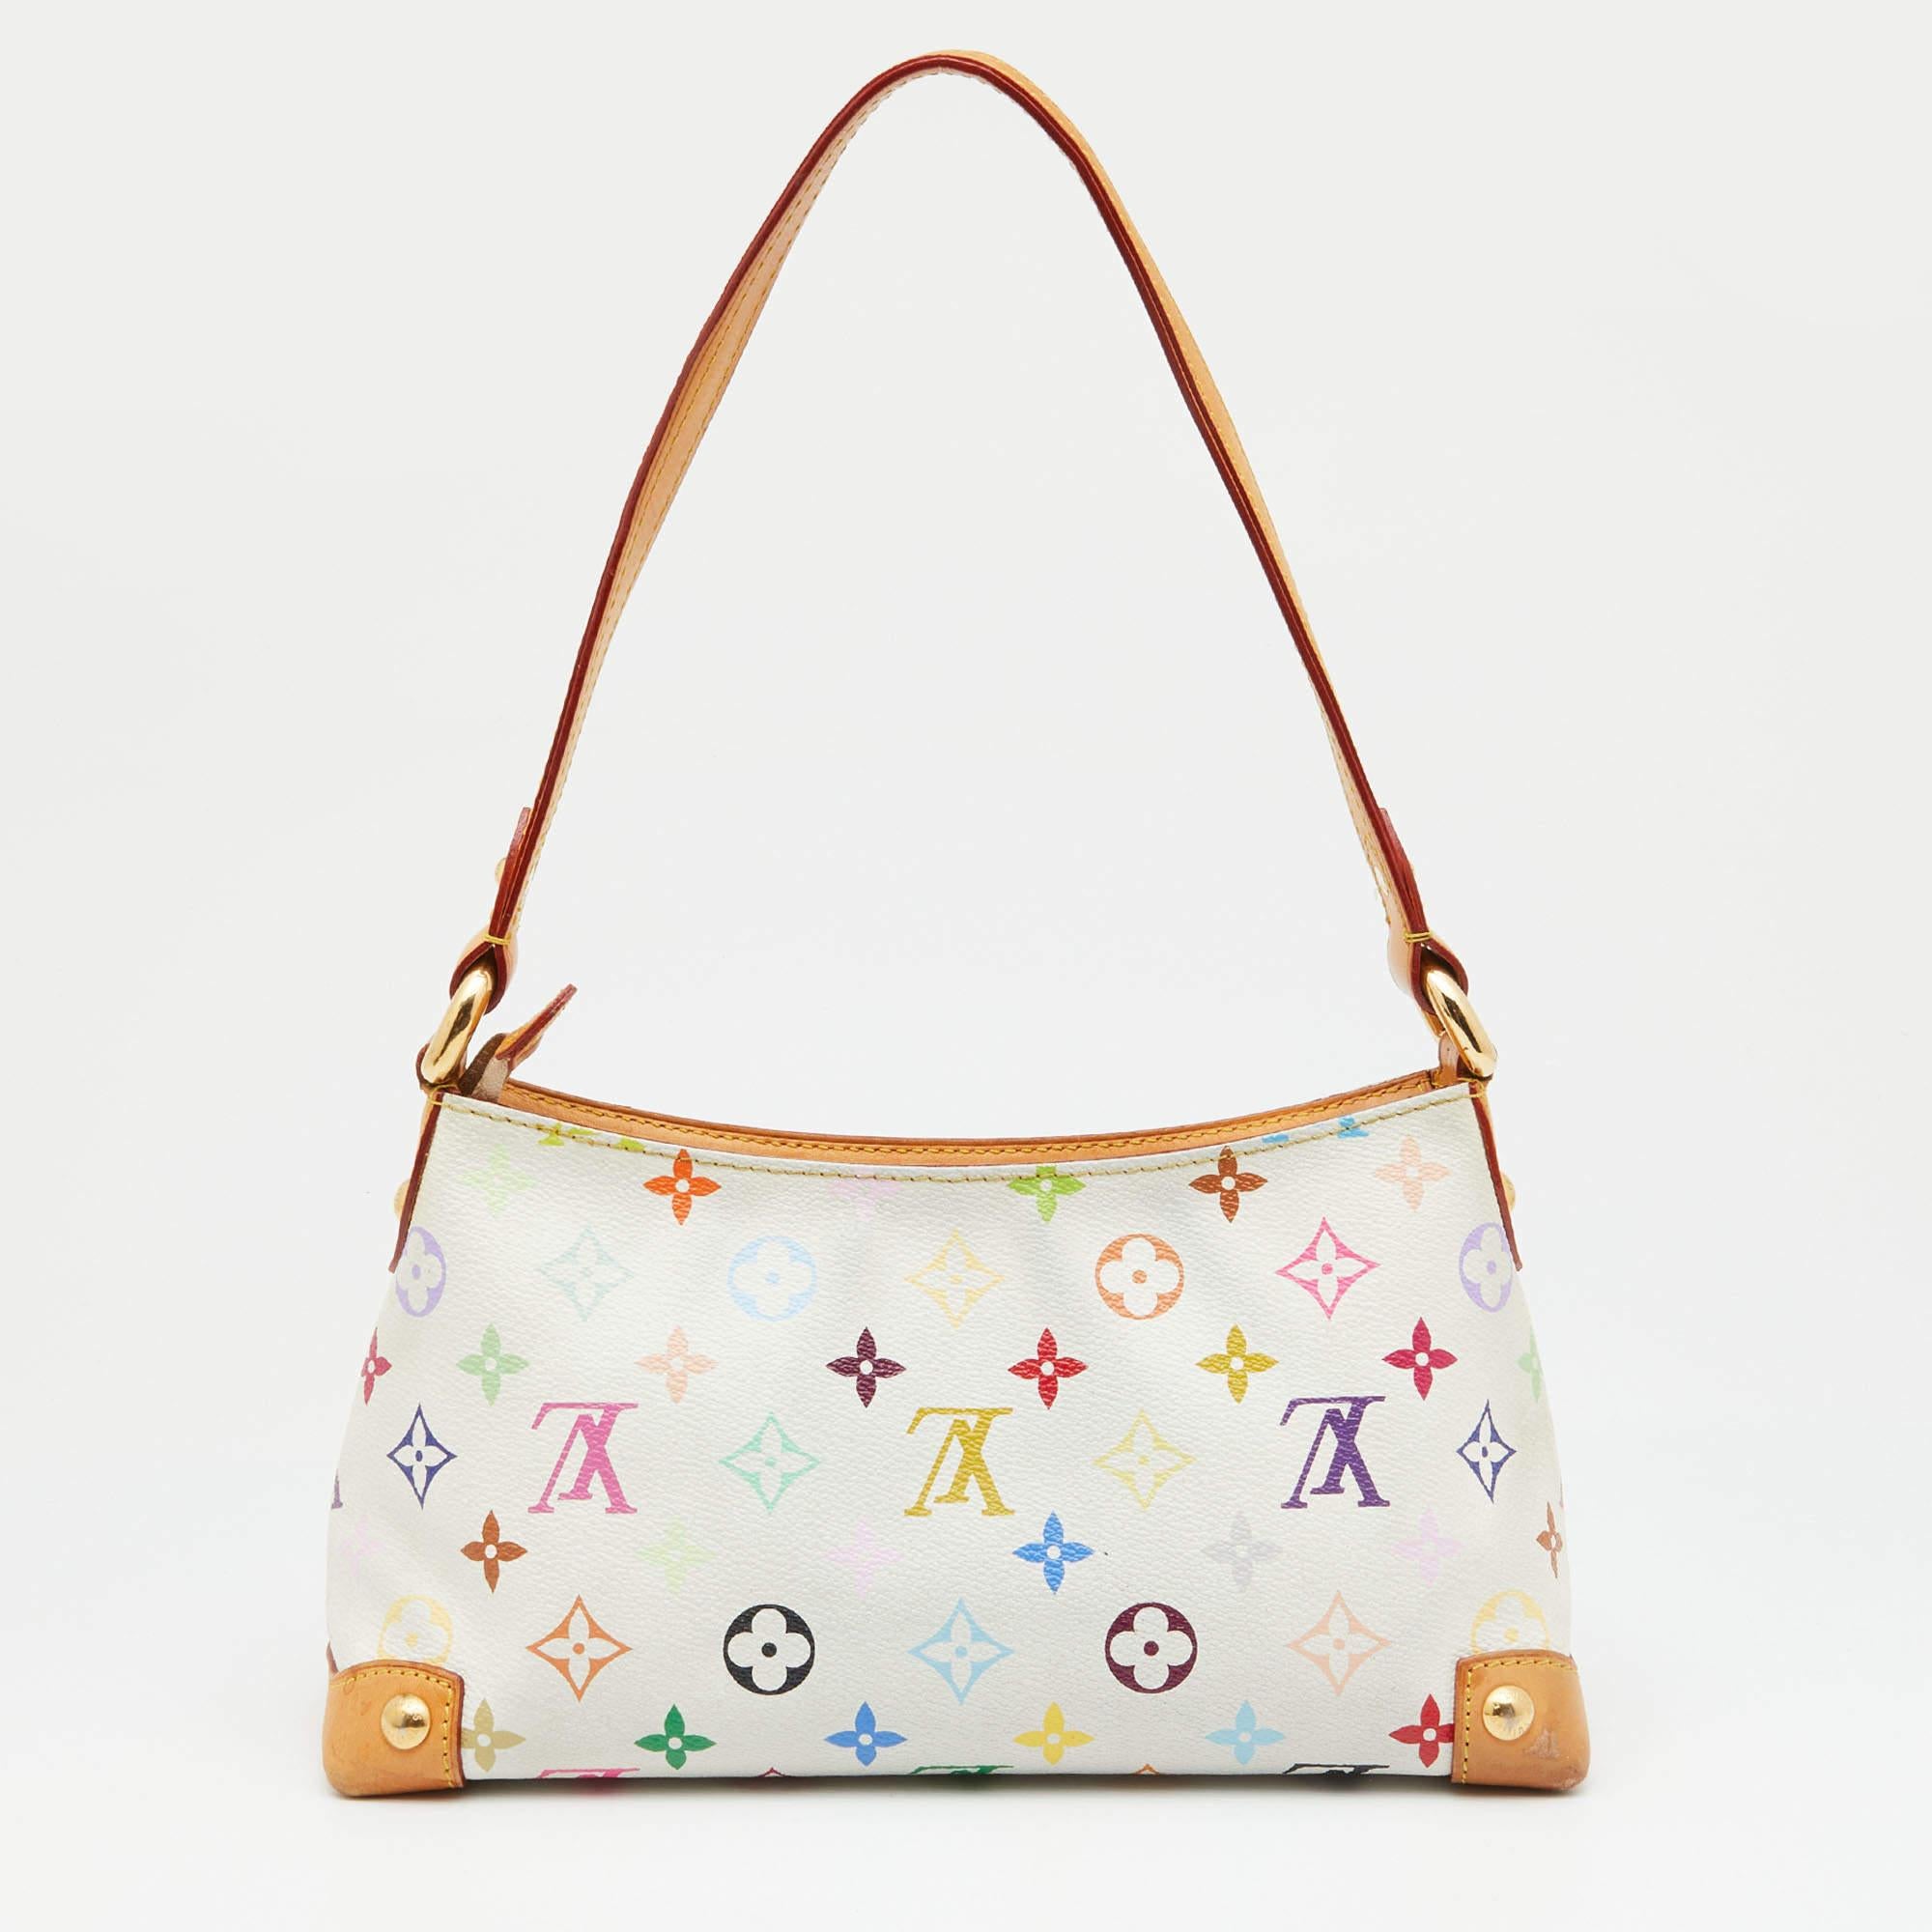 Named after Audrey Hepburn’s character from the classic ‘My Fair Lady’, the Louis Vuitton Eliza is pretty and sophisticated. Crafted from Takashi Murakami’s youthful Monogram Multicolore canvas, this bag features a front pocket secured by a buckled